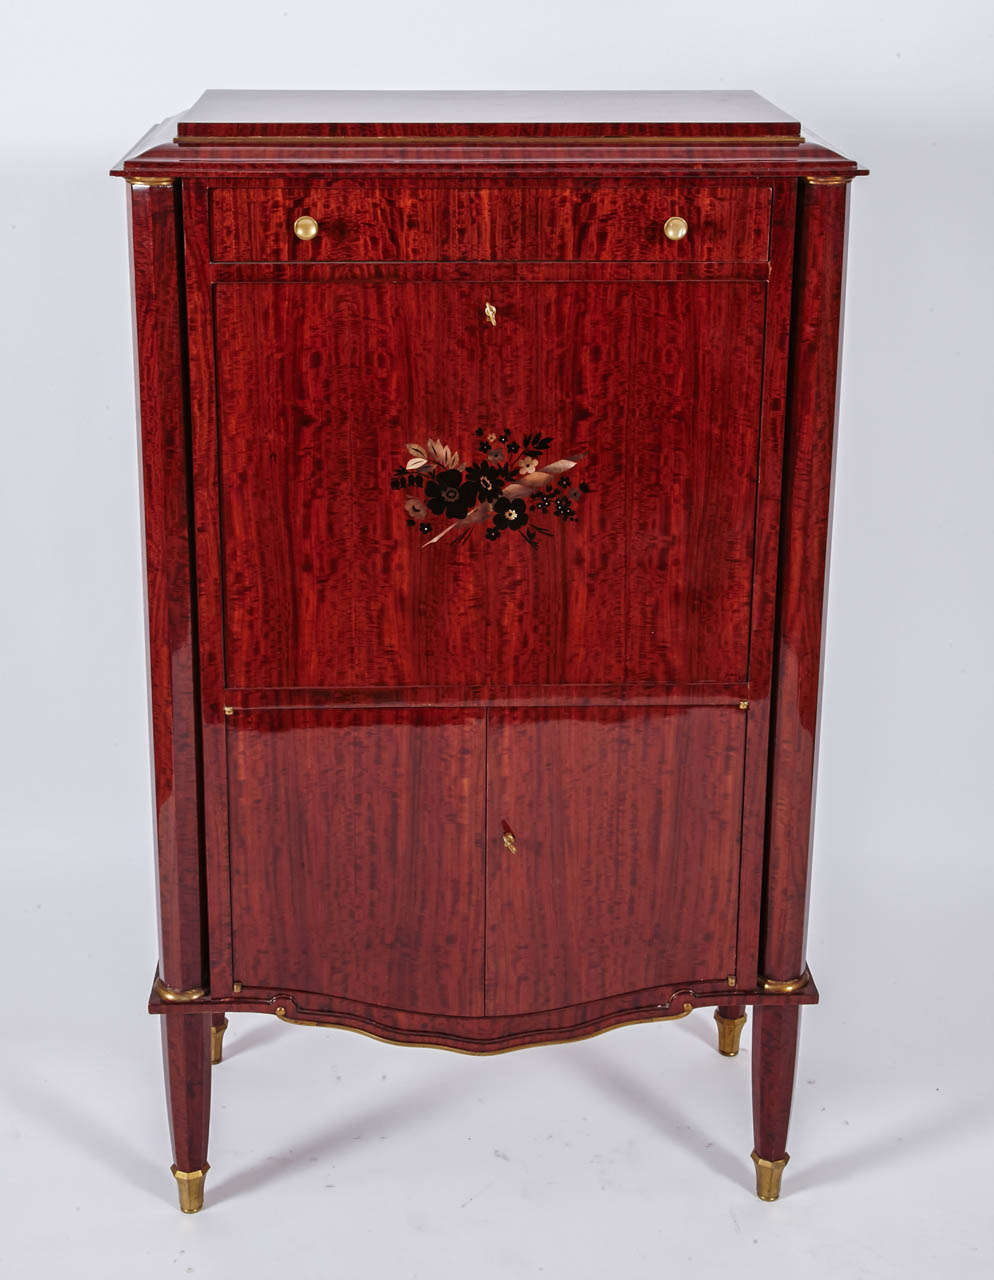 exceptional secretaire by JULES LELEU, circa 1940. signed inside door.
Mahogany. Marquetry of ebony and mother of pearl drawing a feather and flowers
bronze sabots on the four feet
inside sycamore and leather
lighting .